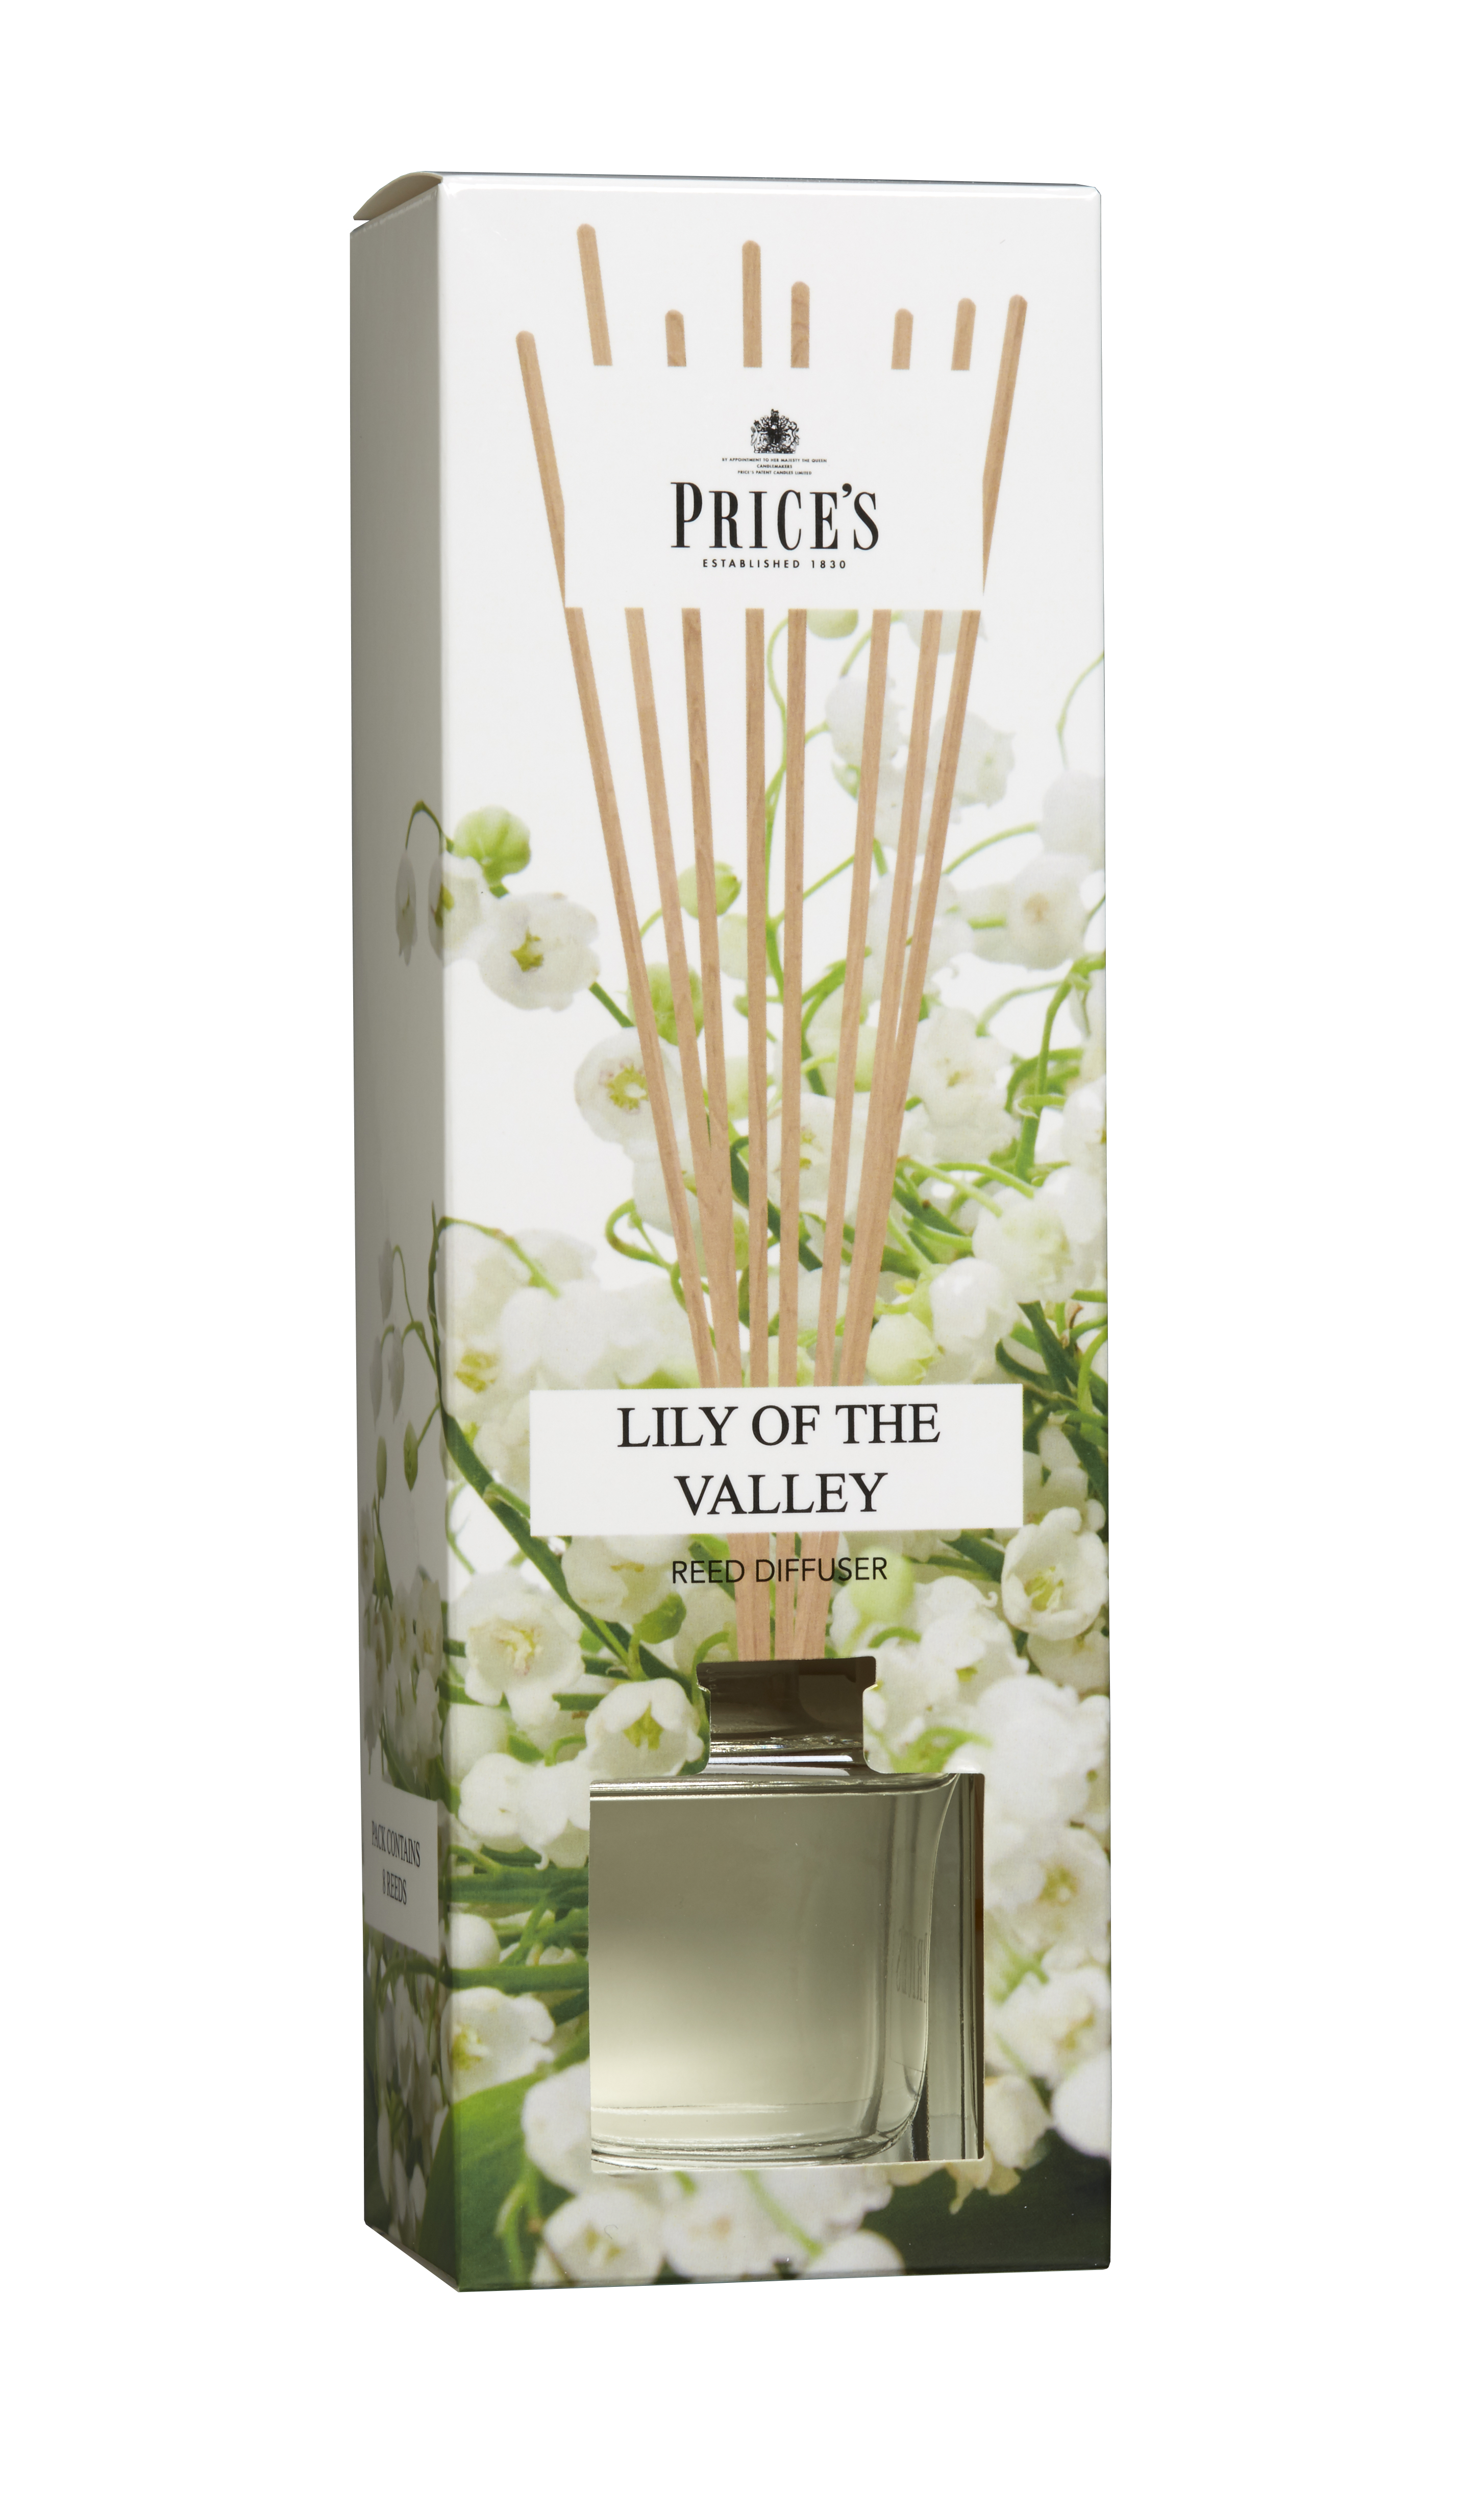 Prices Raumduft "Lily of the Valley" 100ml     